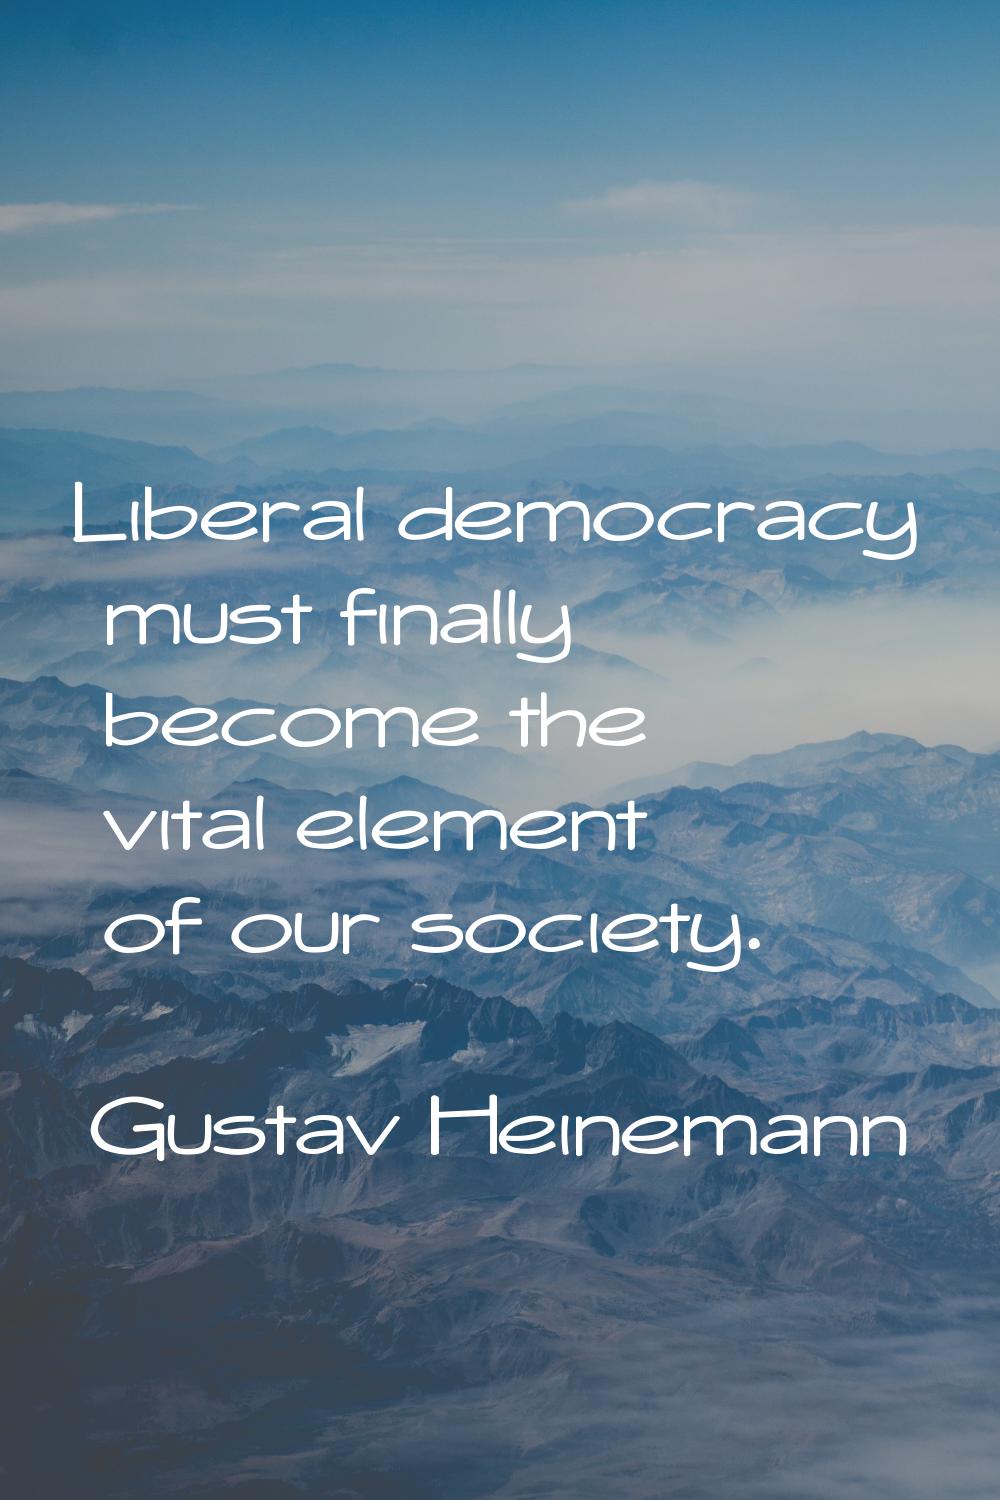 Liberal democracy must finally become the vital element of our society.